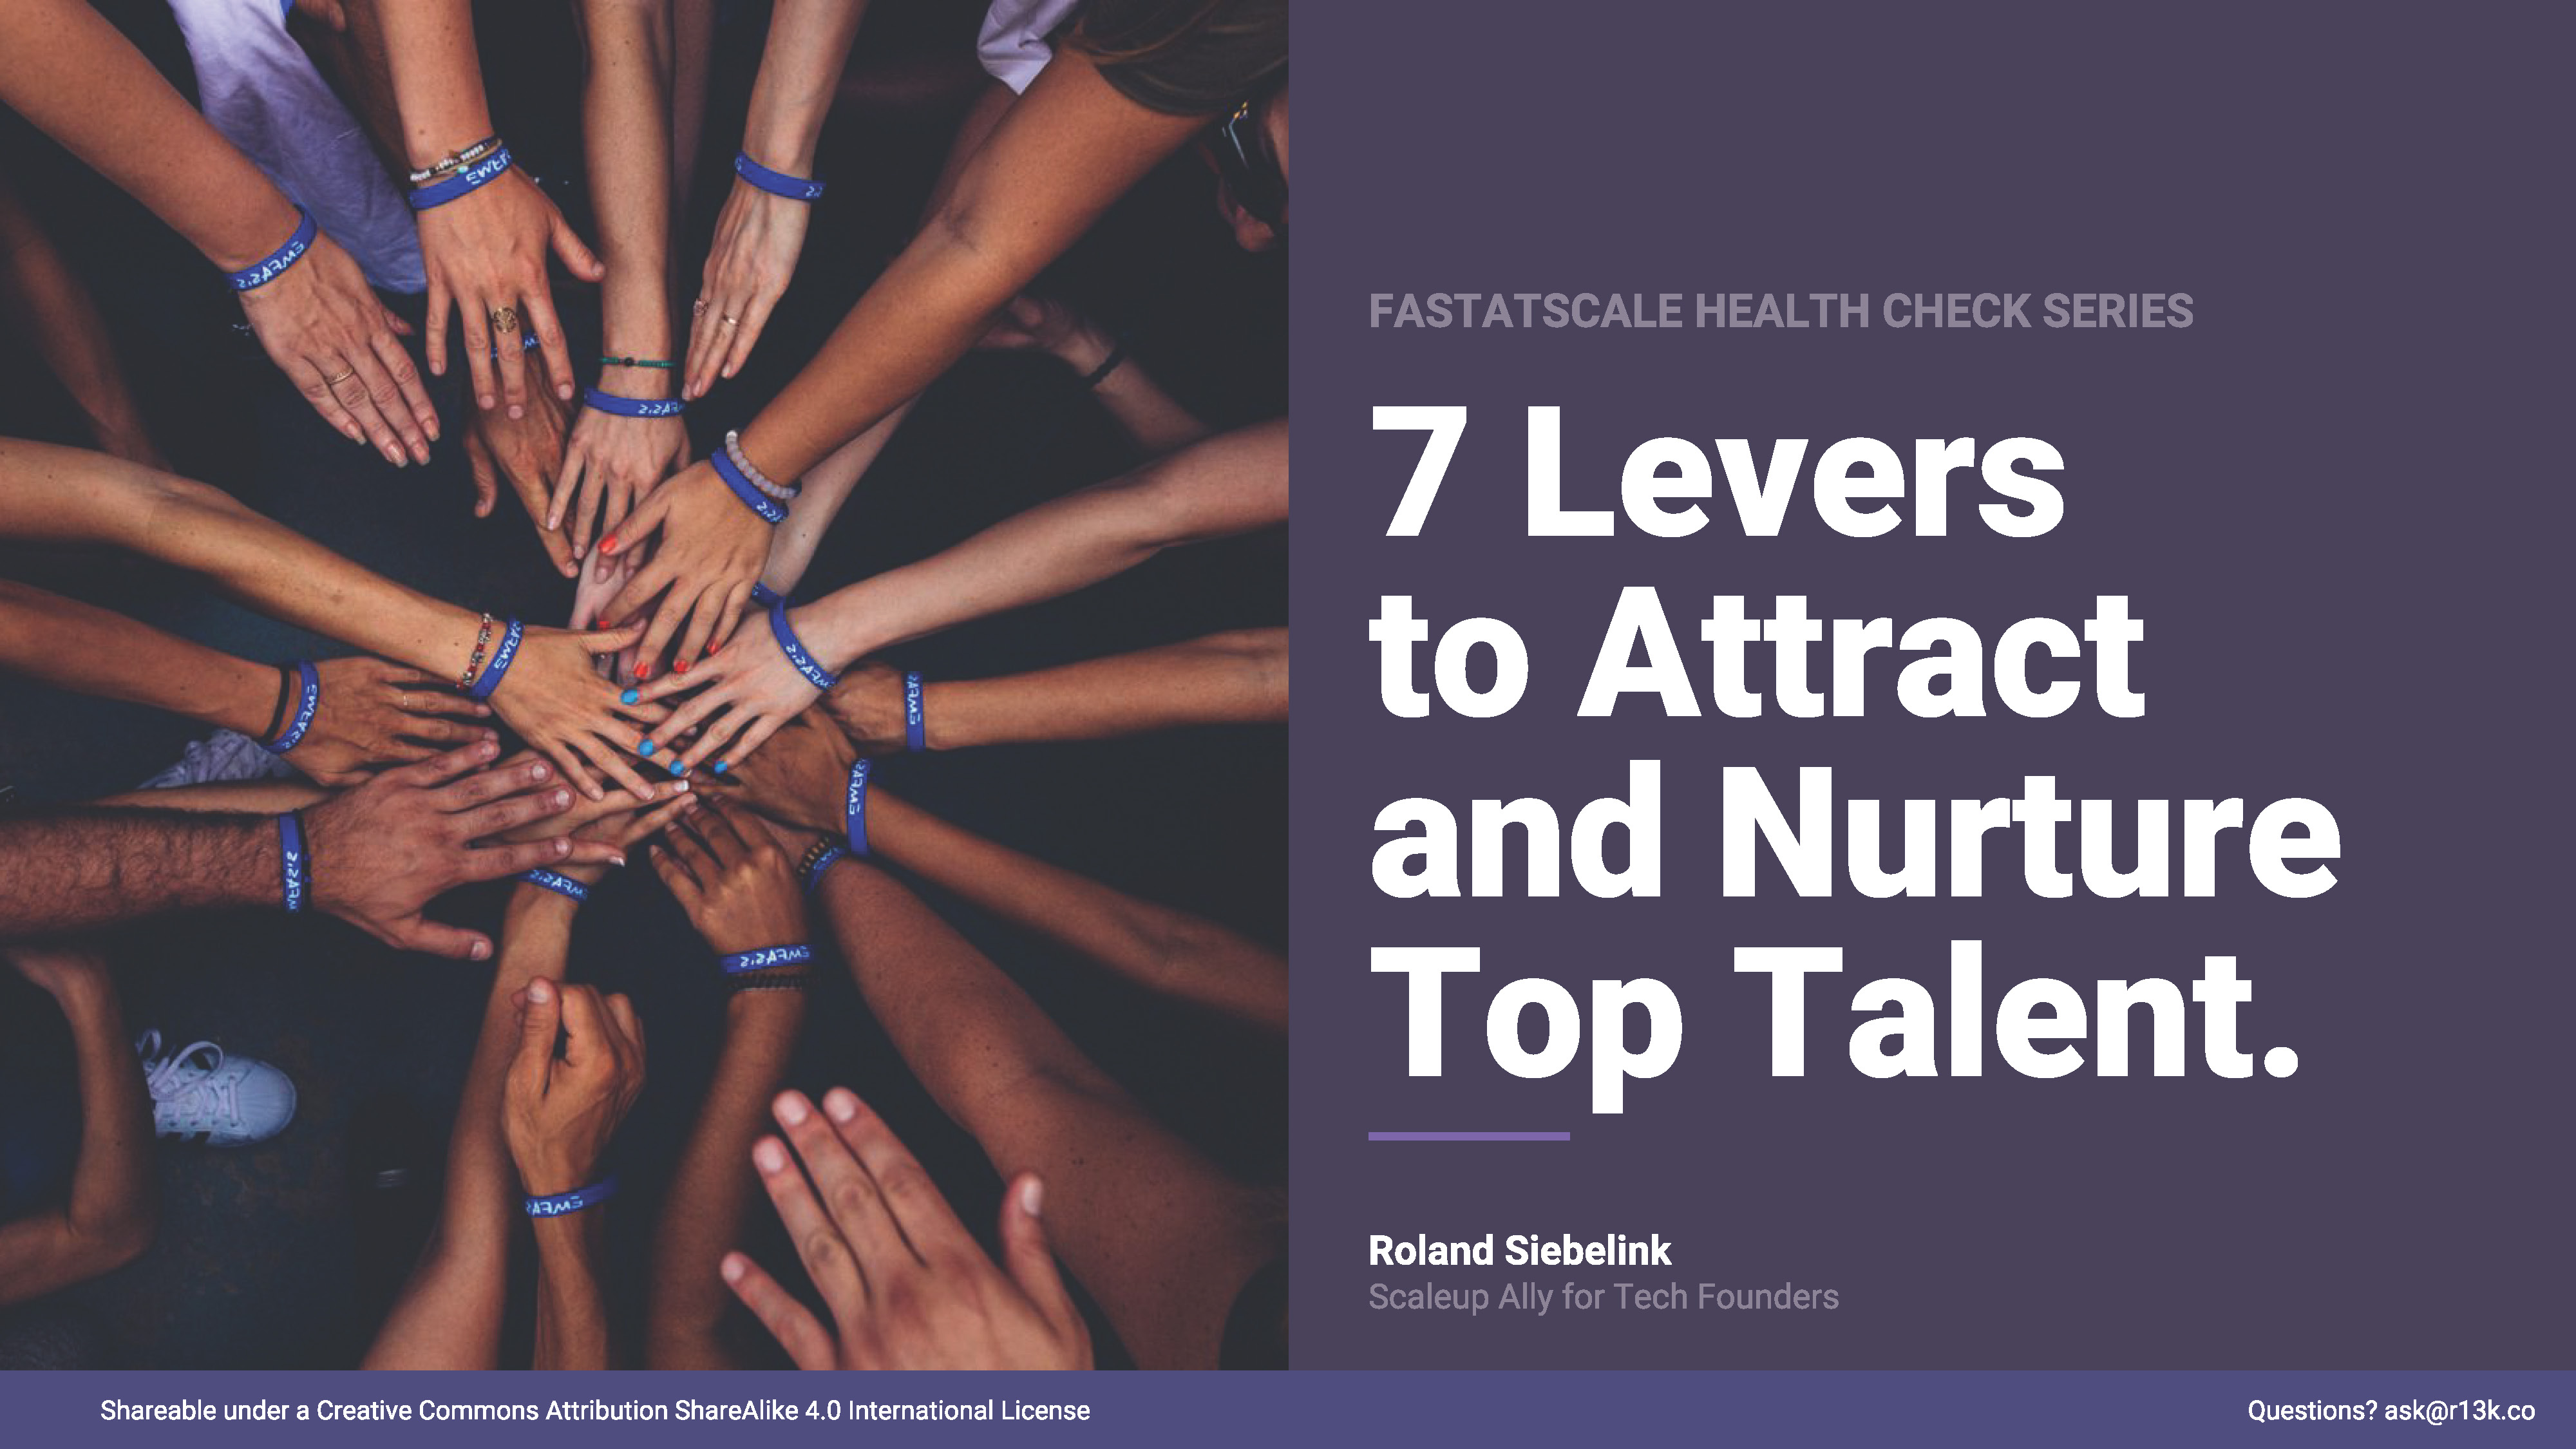 7 Levers to Attract and Nurture Top Talent 